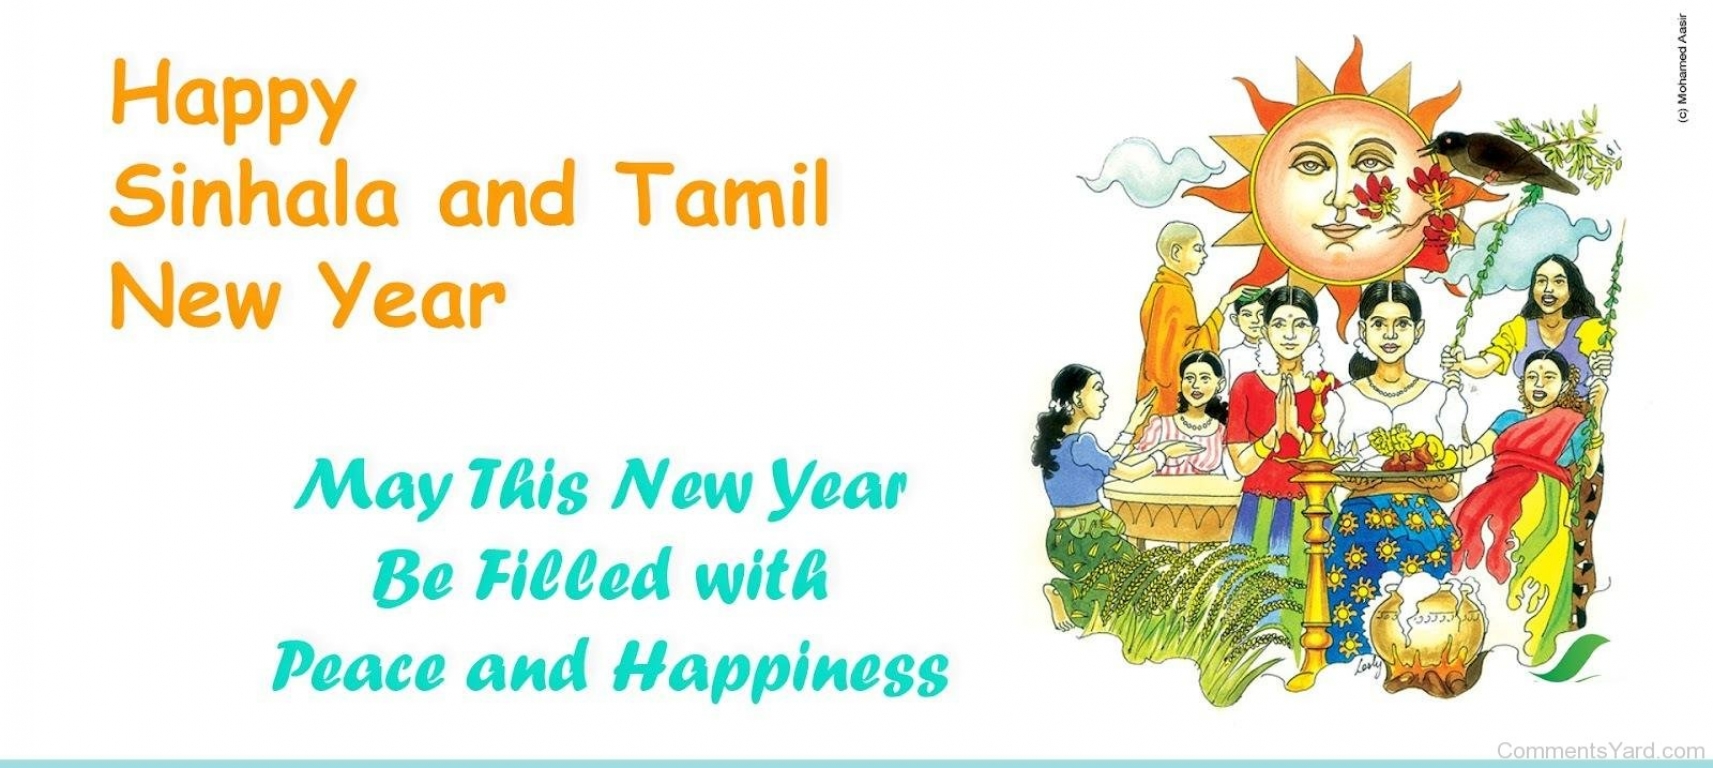 essay about sinhala and hindu new year